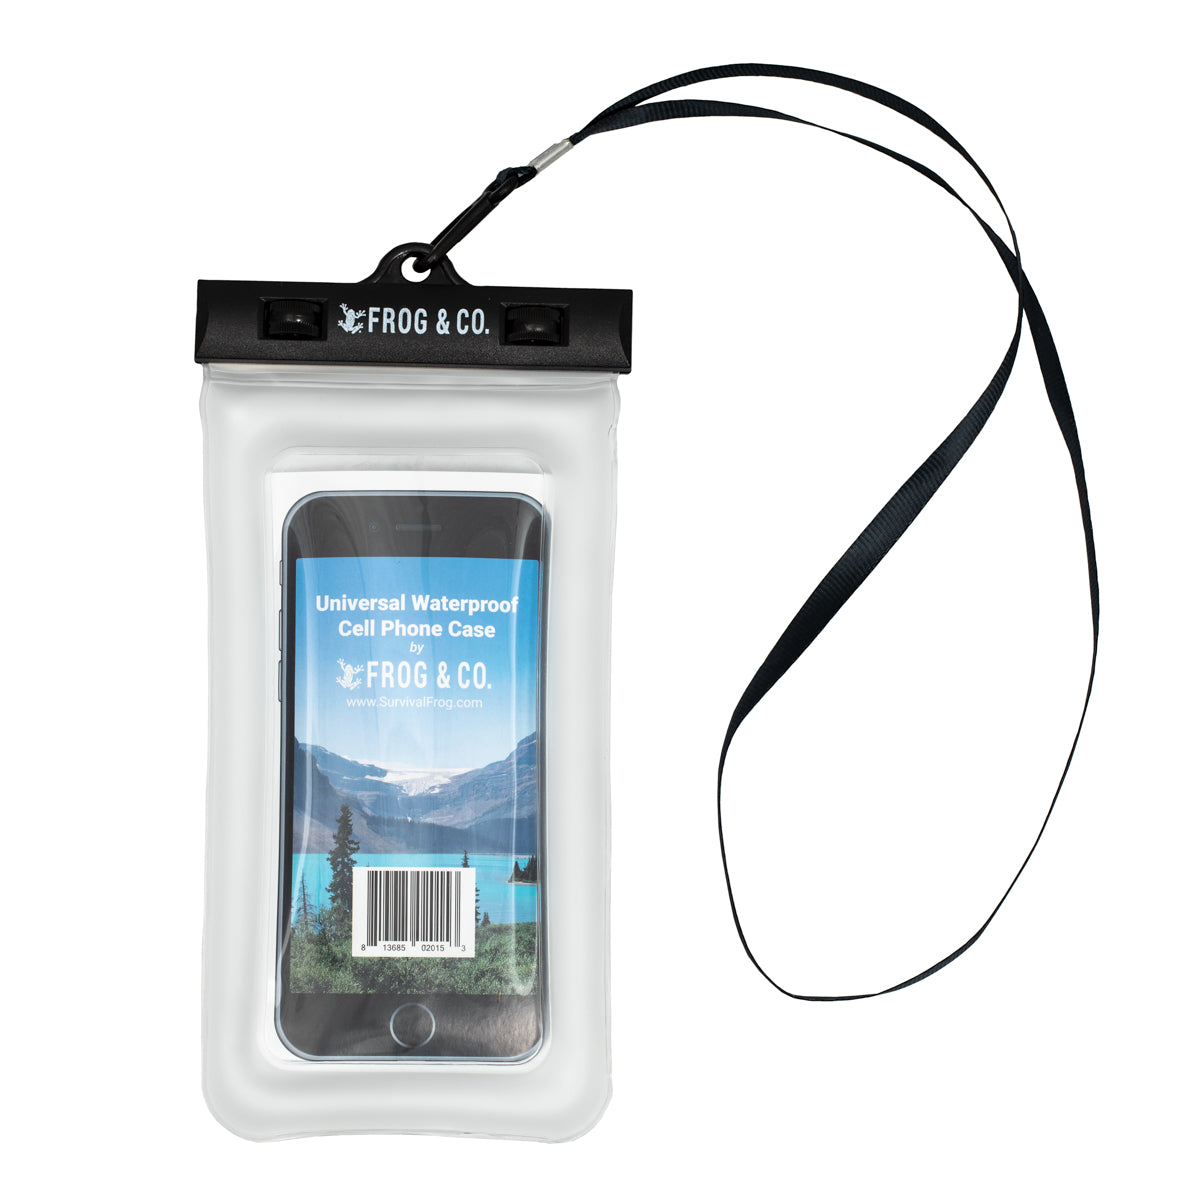 Frog & Co. Waterproof Cell Phone Case 2.0